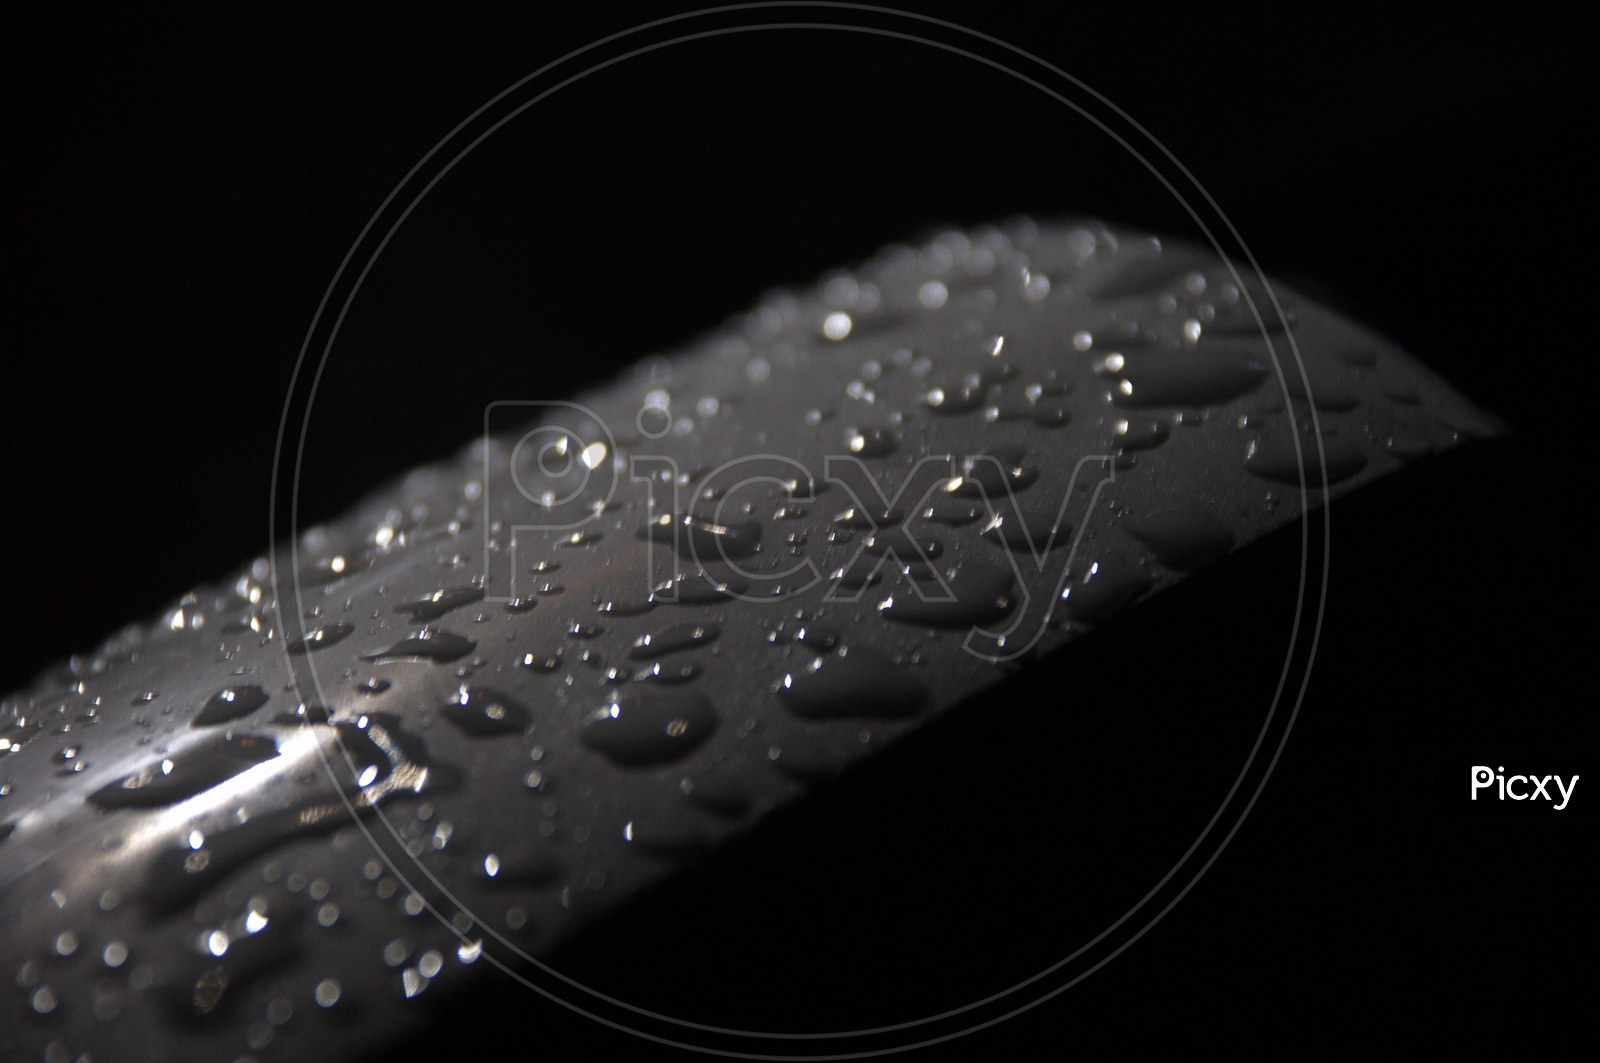 Water droplets grey and black abstract background